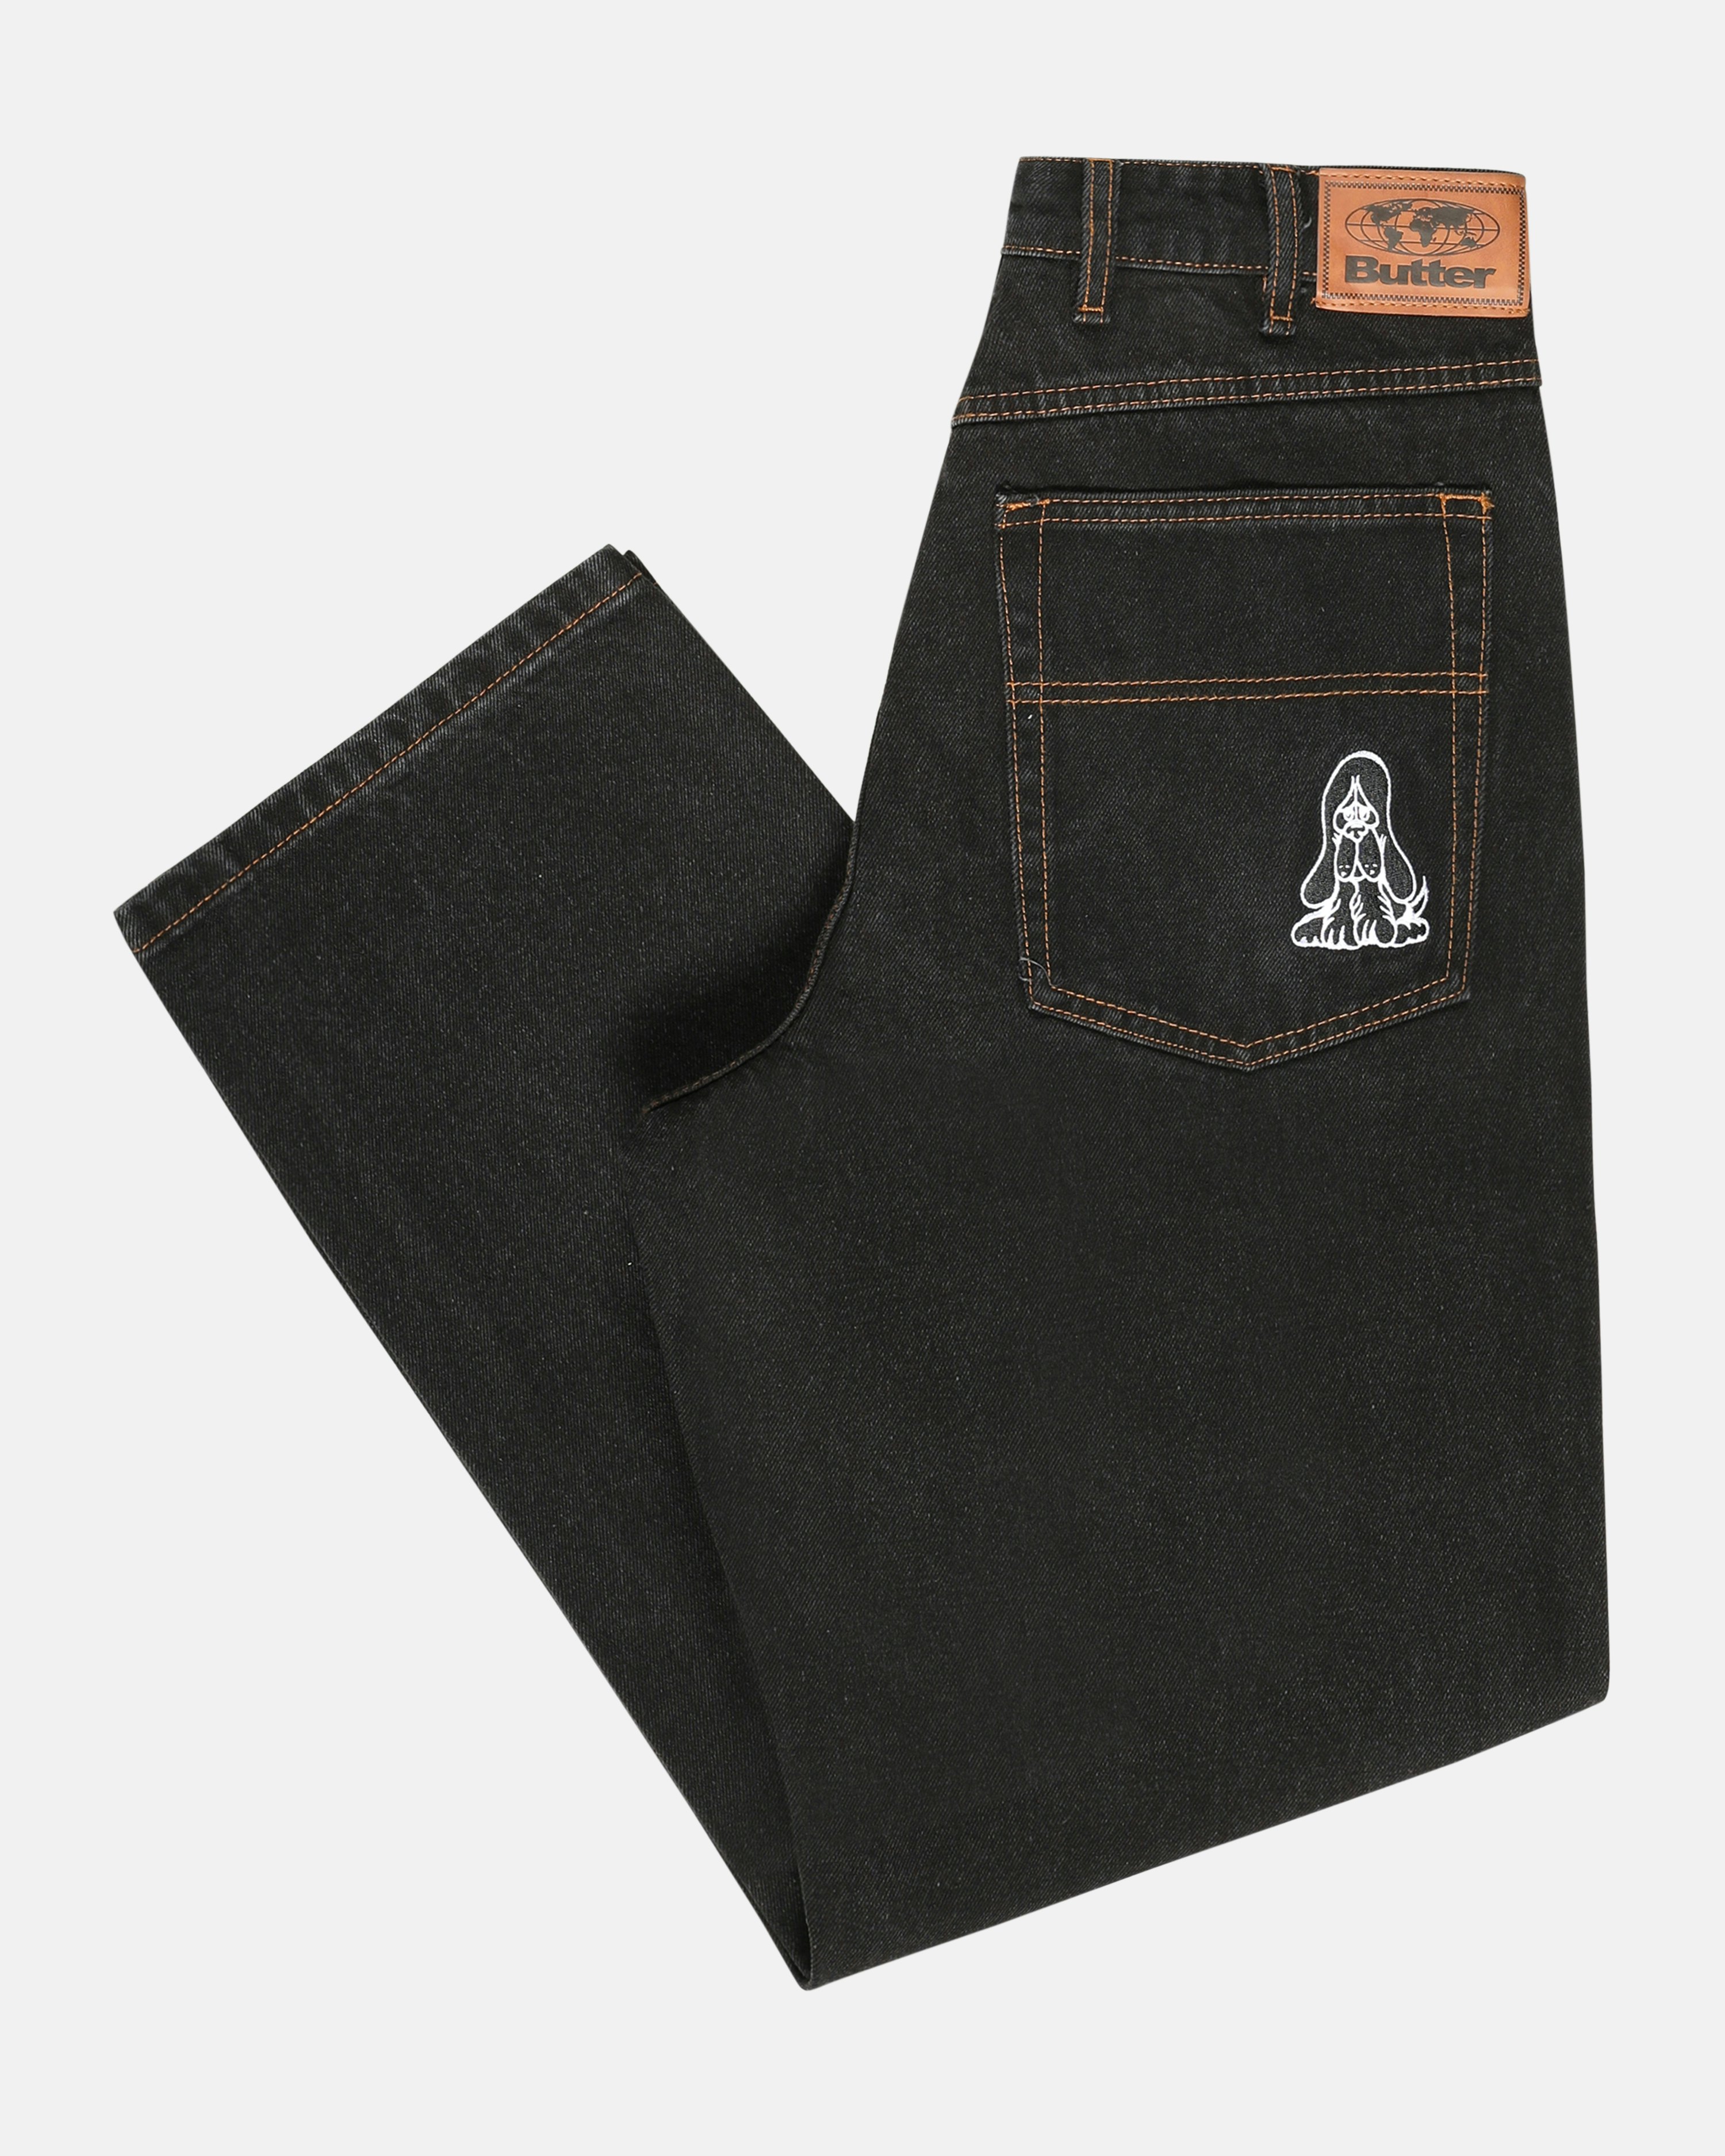 Hound Jeans - Printed Jeans - Black Denim » Cheap Delivery